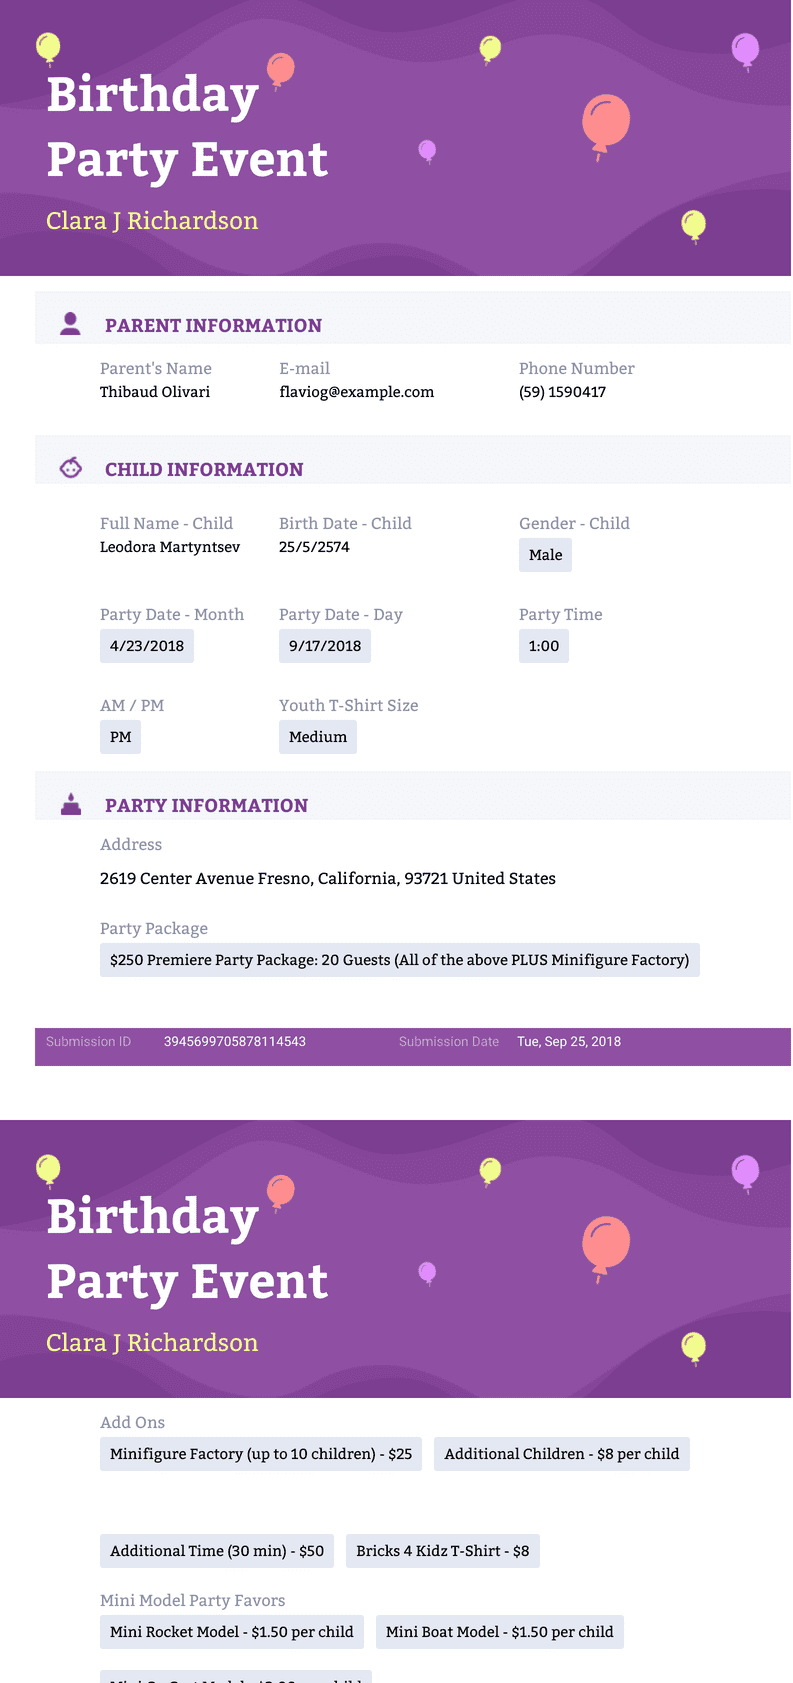 PDF Templates: Birthday Party Event Template